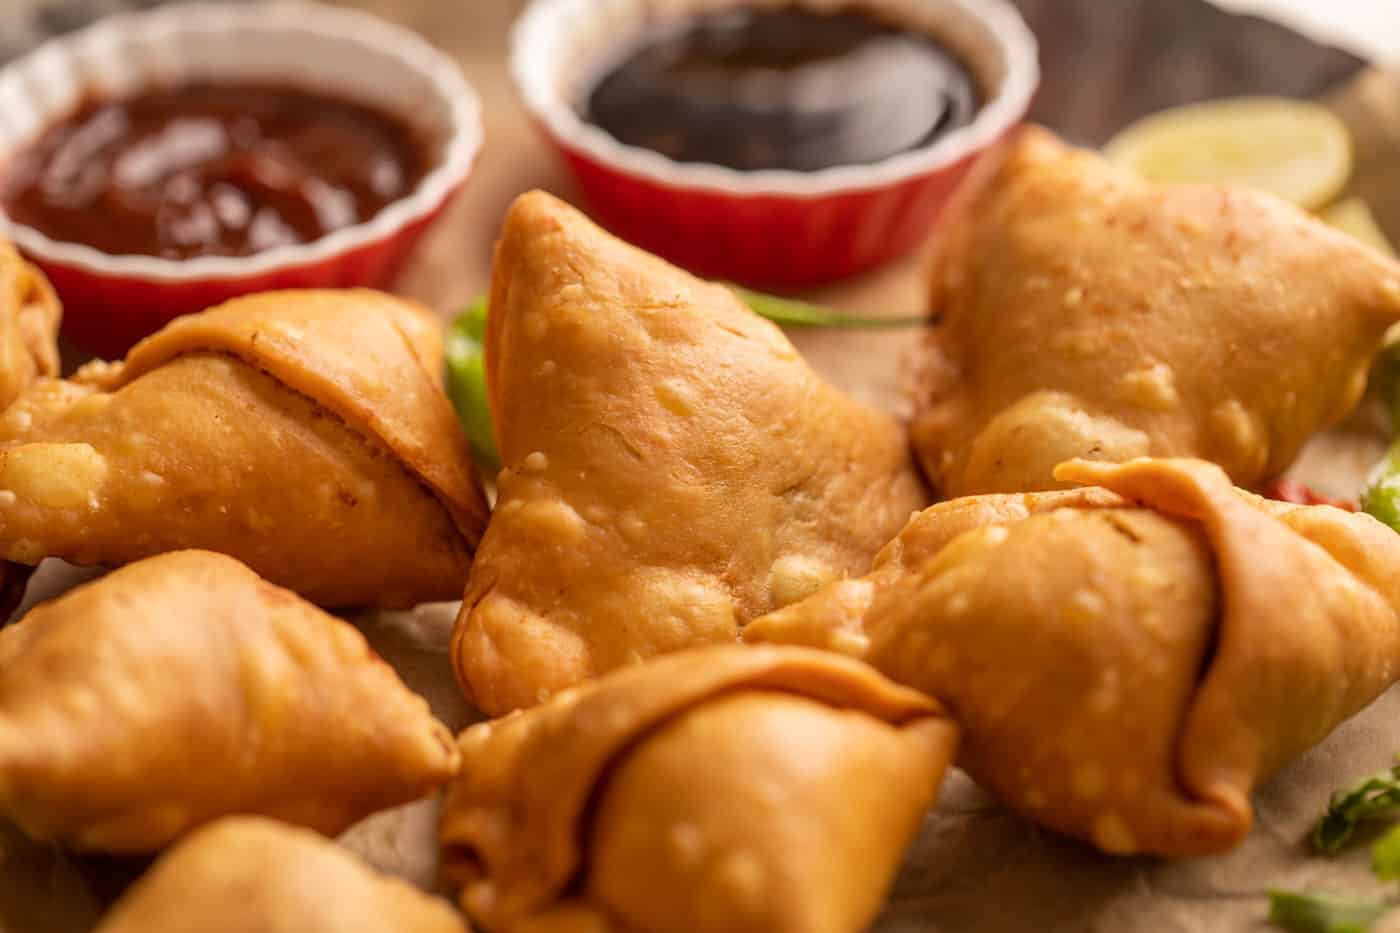 A plate with delicious fried samosas